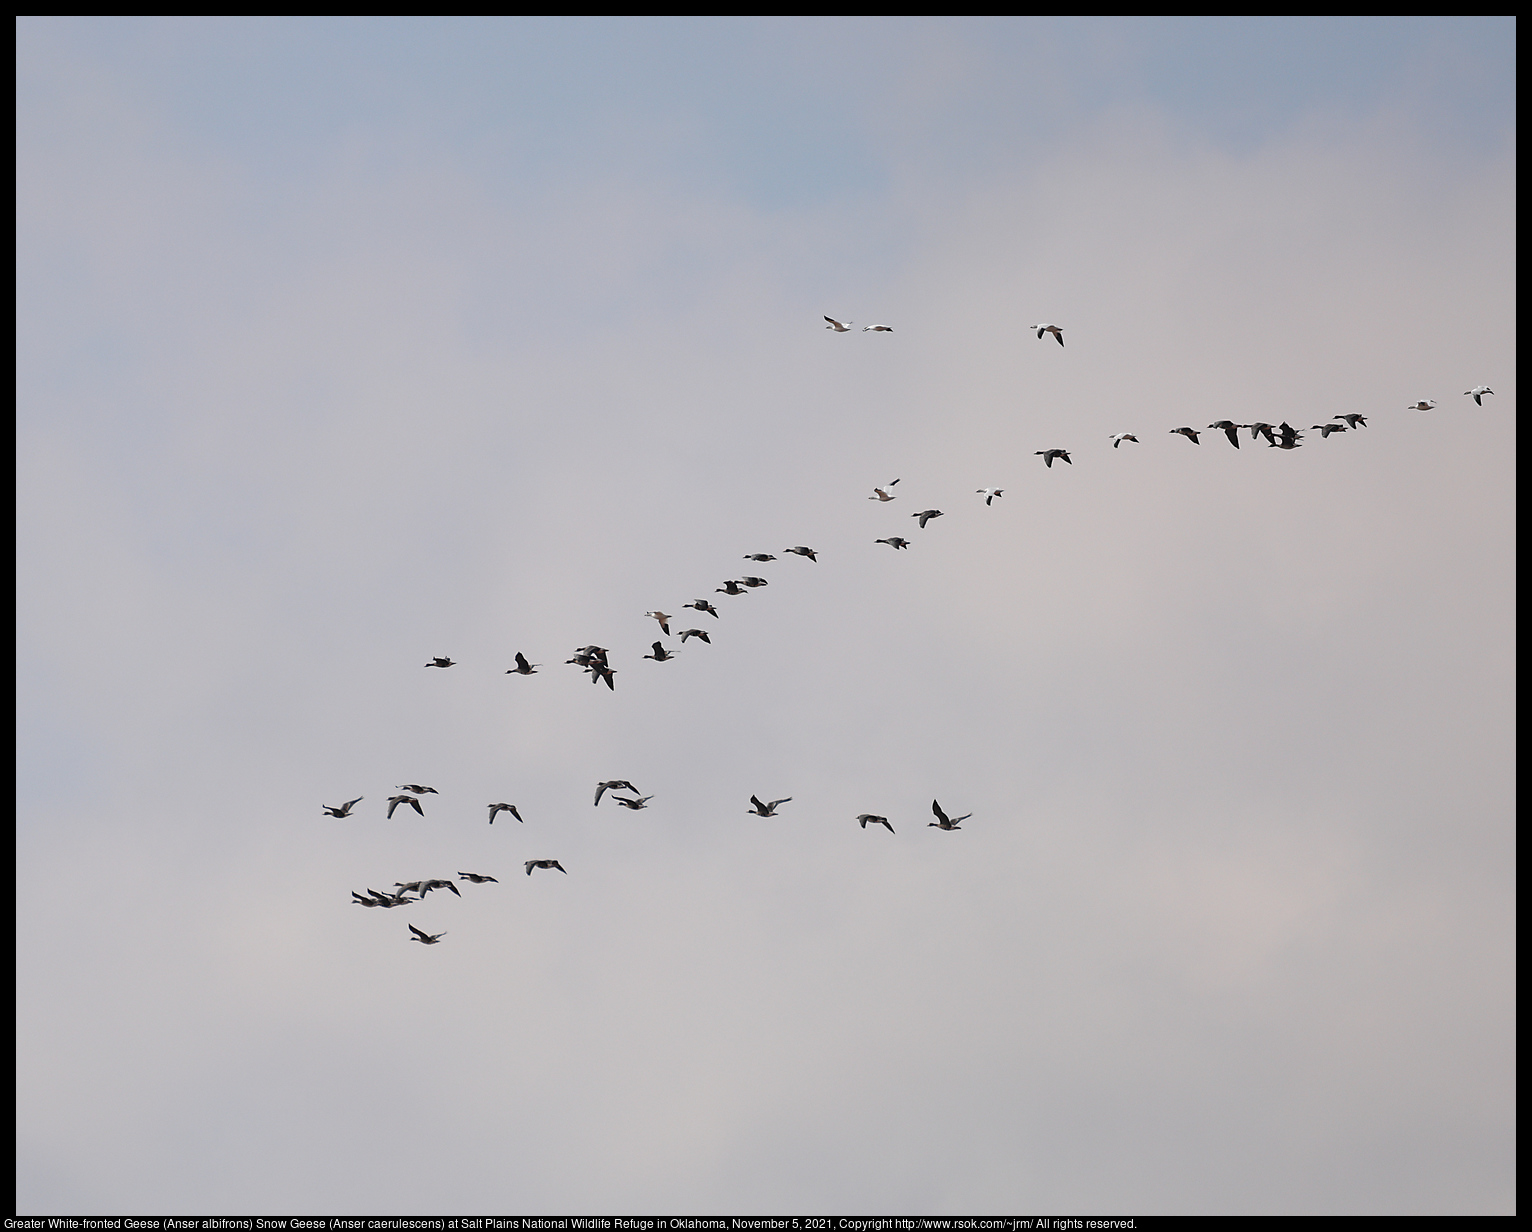 Greater White-fronted Geese (Anser albifrons) and Snow Geese (Anser caerulescens) at Salt Plains National Wildlife Refuge in Oklahoma, November 5, 2021